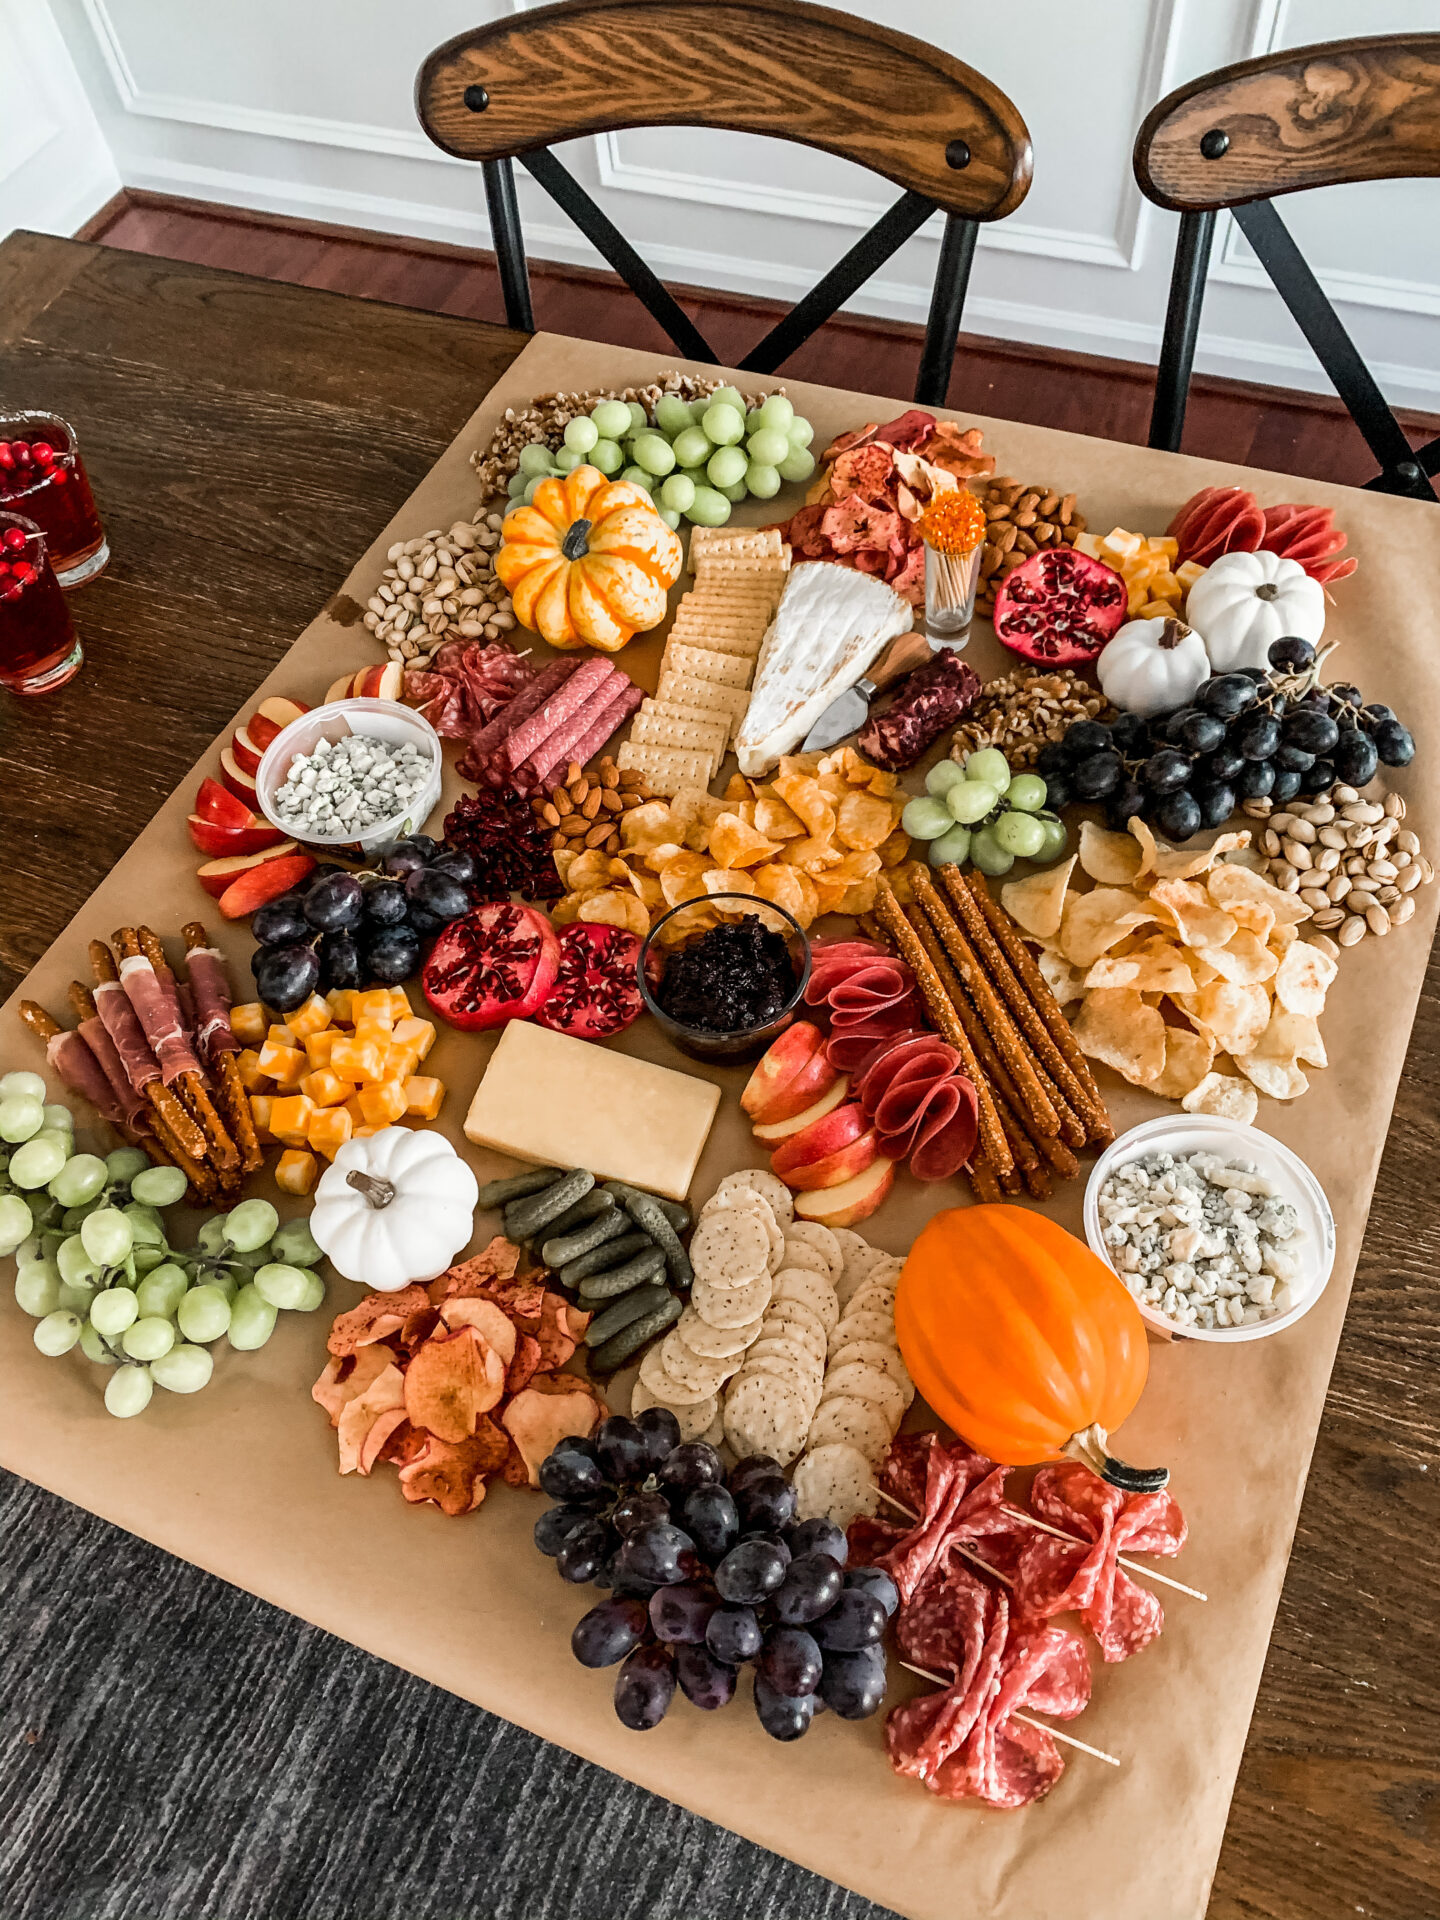 HARVEST CHARCUTERIE BOARD - How to Make a Charcuterie Board for Fall, with ShopRite on Coming Up Roses